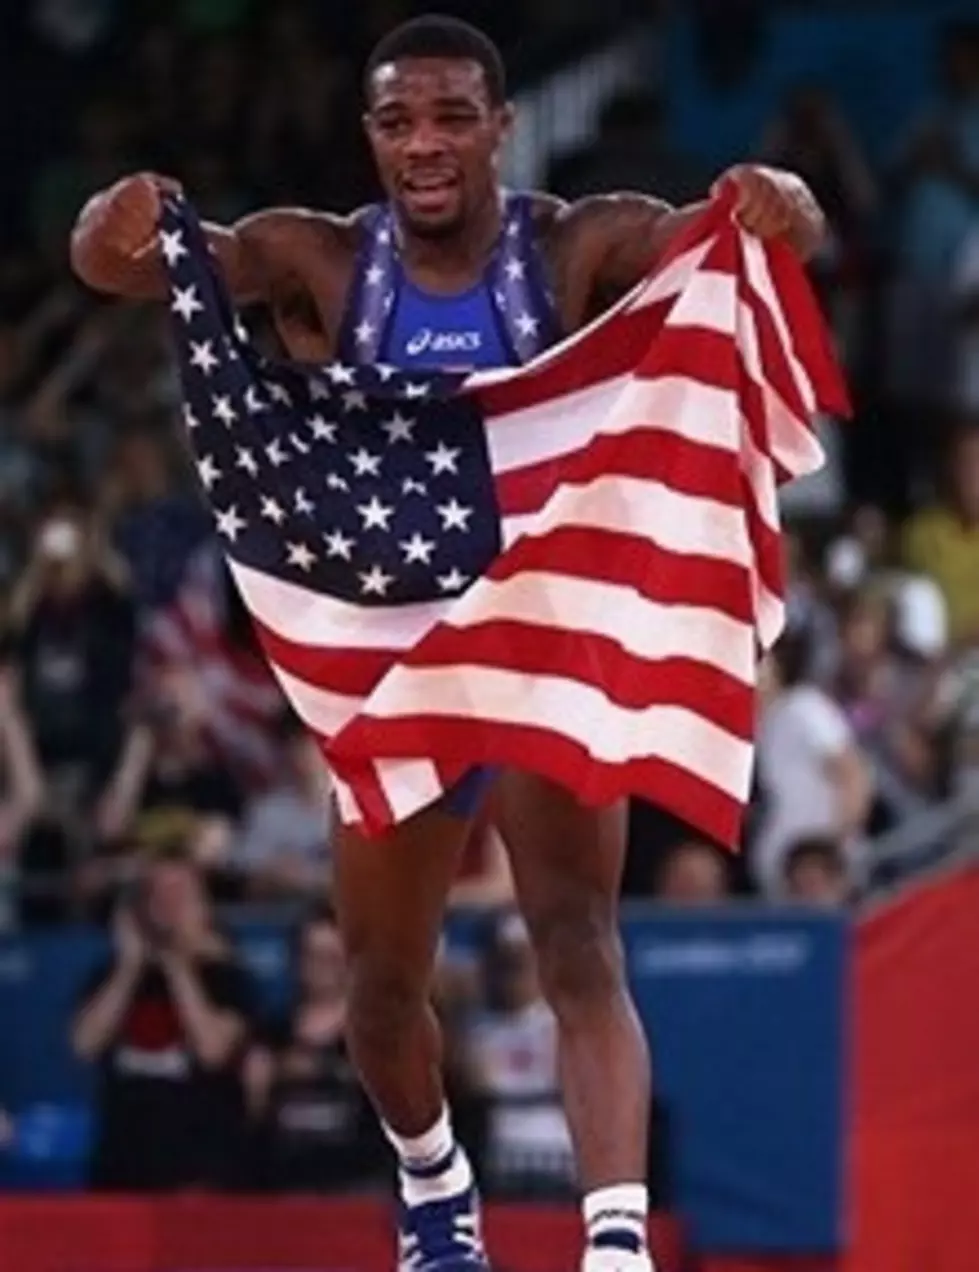 South Jersey’s Burroughs Closes The Deal – Wrestler Wins Gold in London